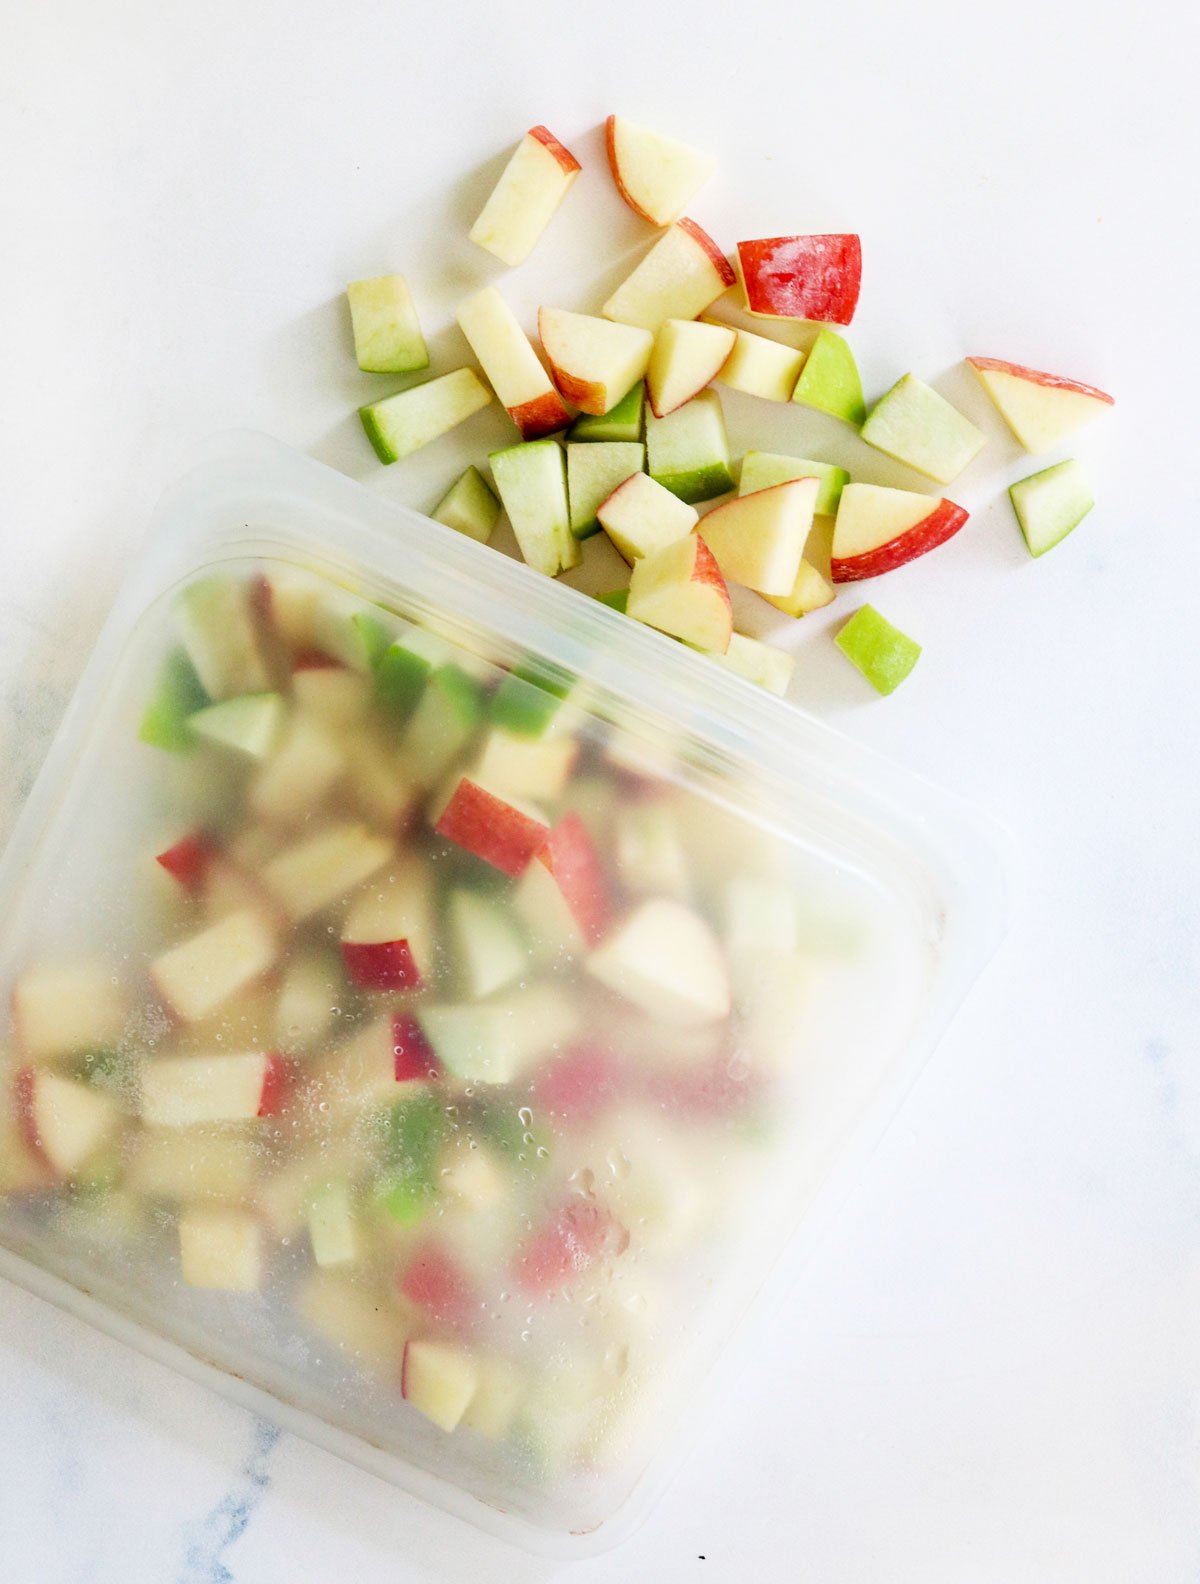 Here's How To Store Apples So They Stay Crisp